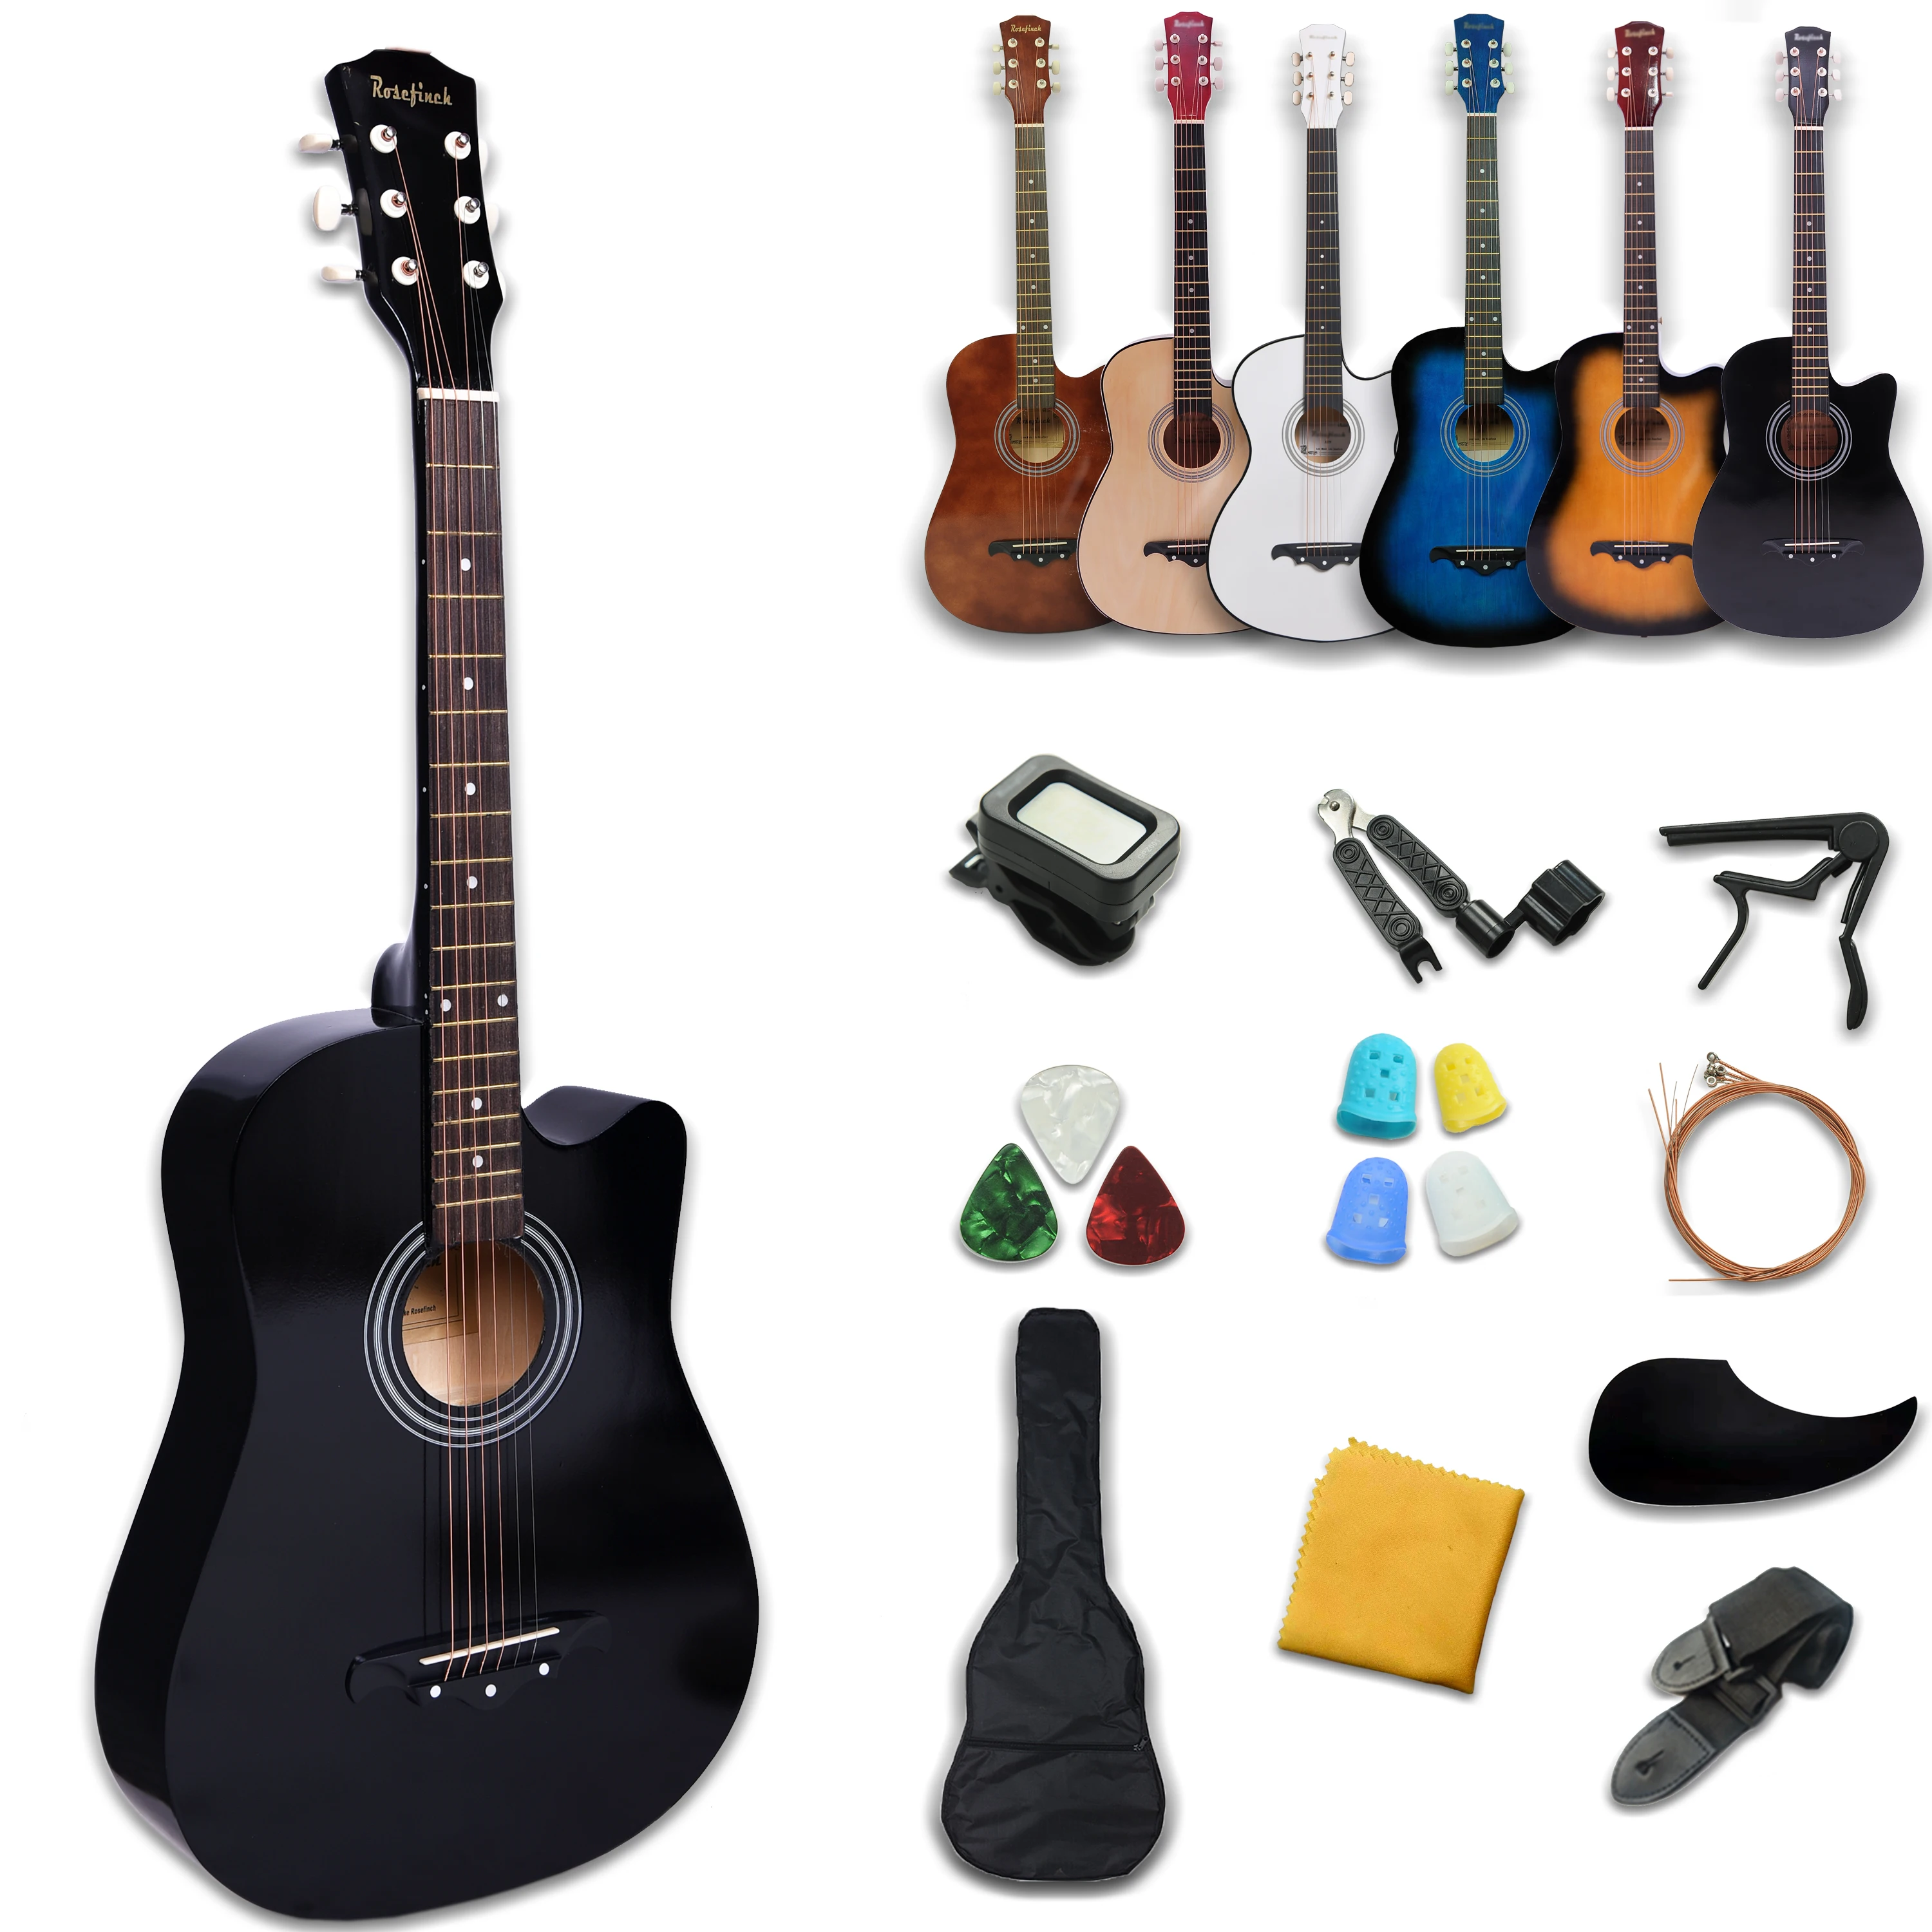 

30/38 Inch Acoustic Guitar Small Size Beginner 6 Steel String Guitarra ith Bag String Capo Strap Pick Tuner